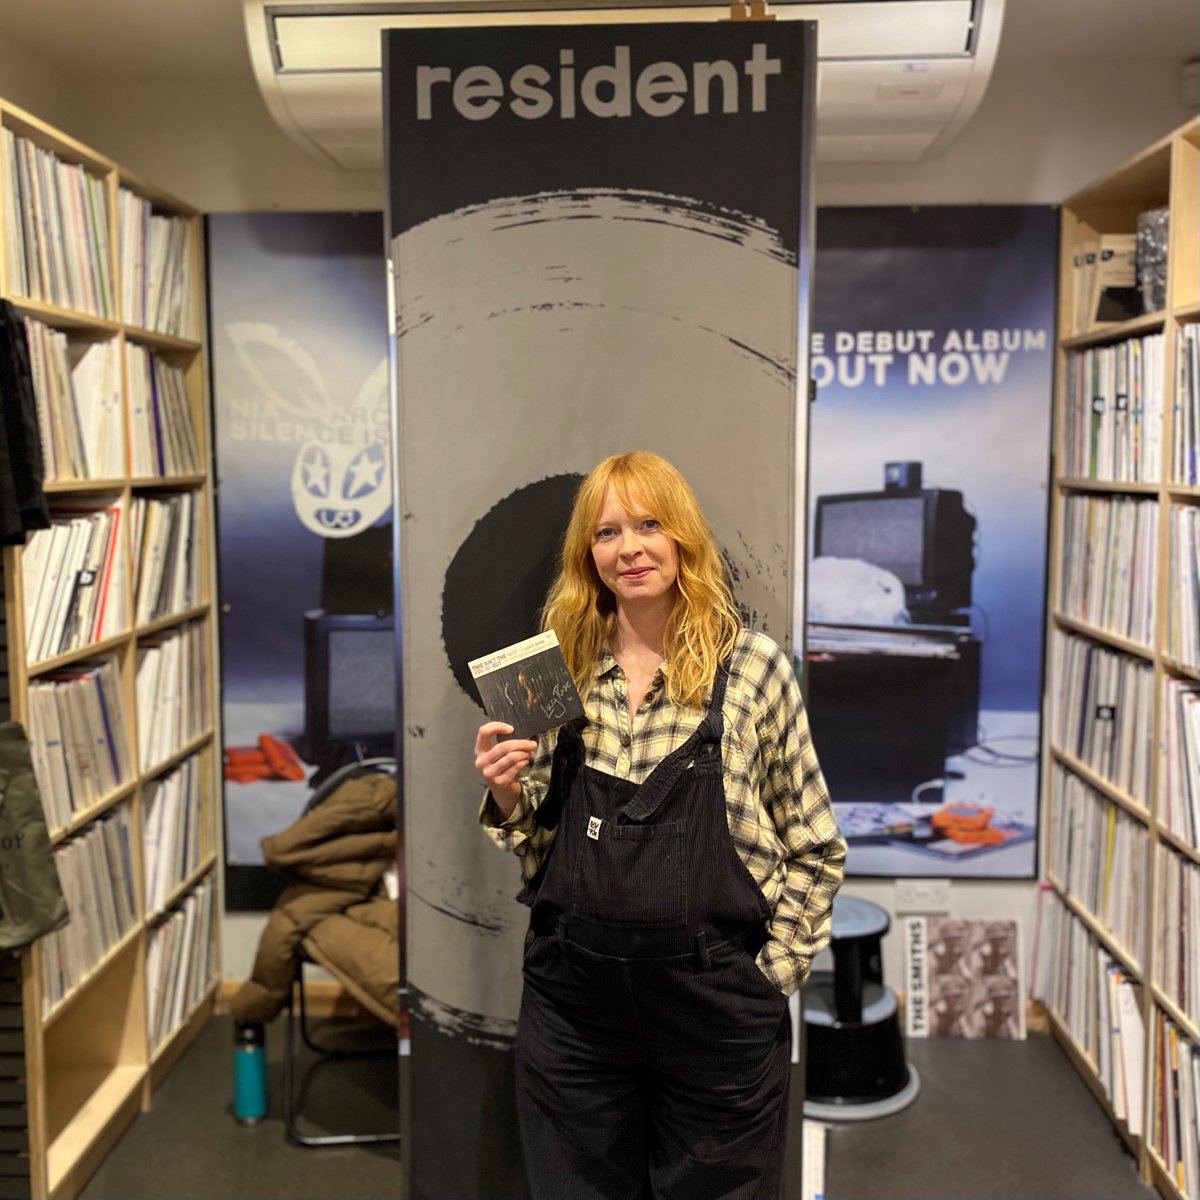 After a stunning performance in the shop on Saturday evening, @lucyrosemusic popped her signature on some extra CDs for those of you who missed out... Get yours here: resident-music.com/productdetails…